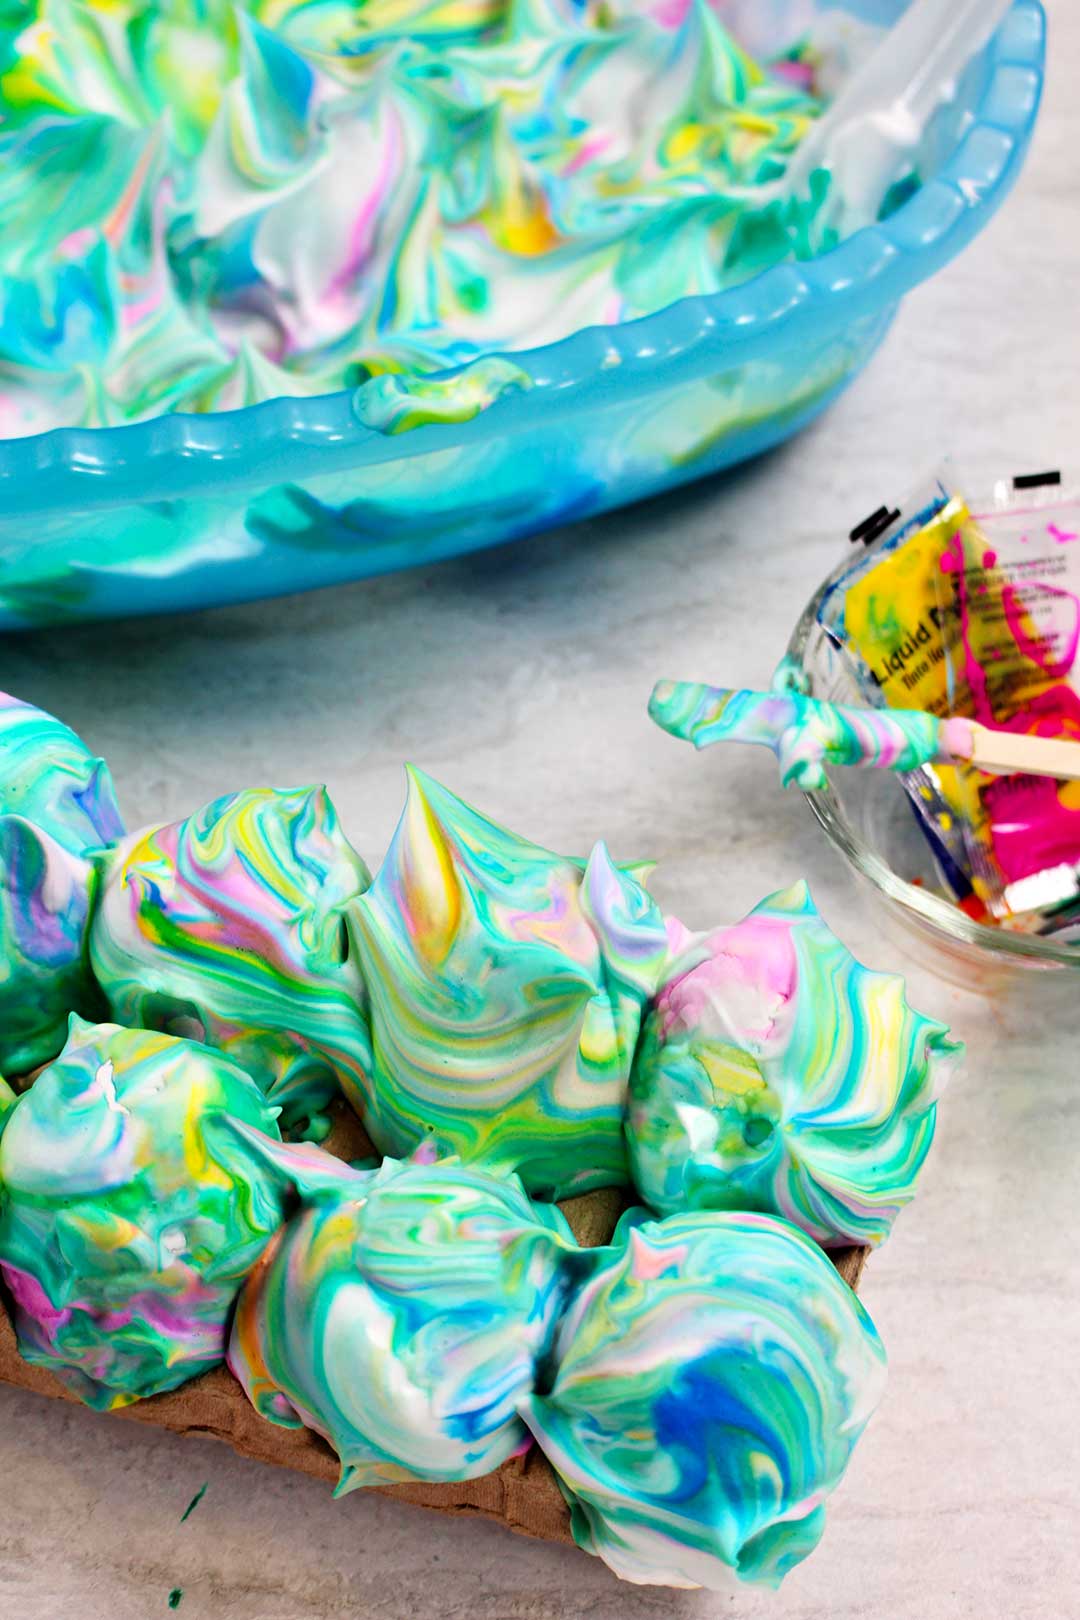 Eggs covered in yellow, green, blue, and pink swirled shaving cream.